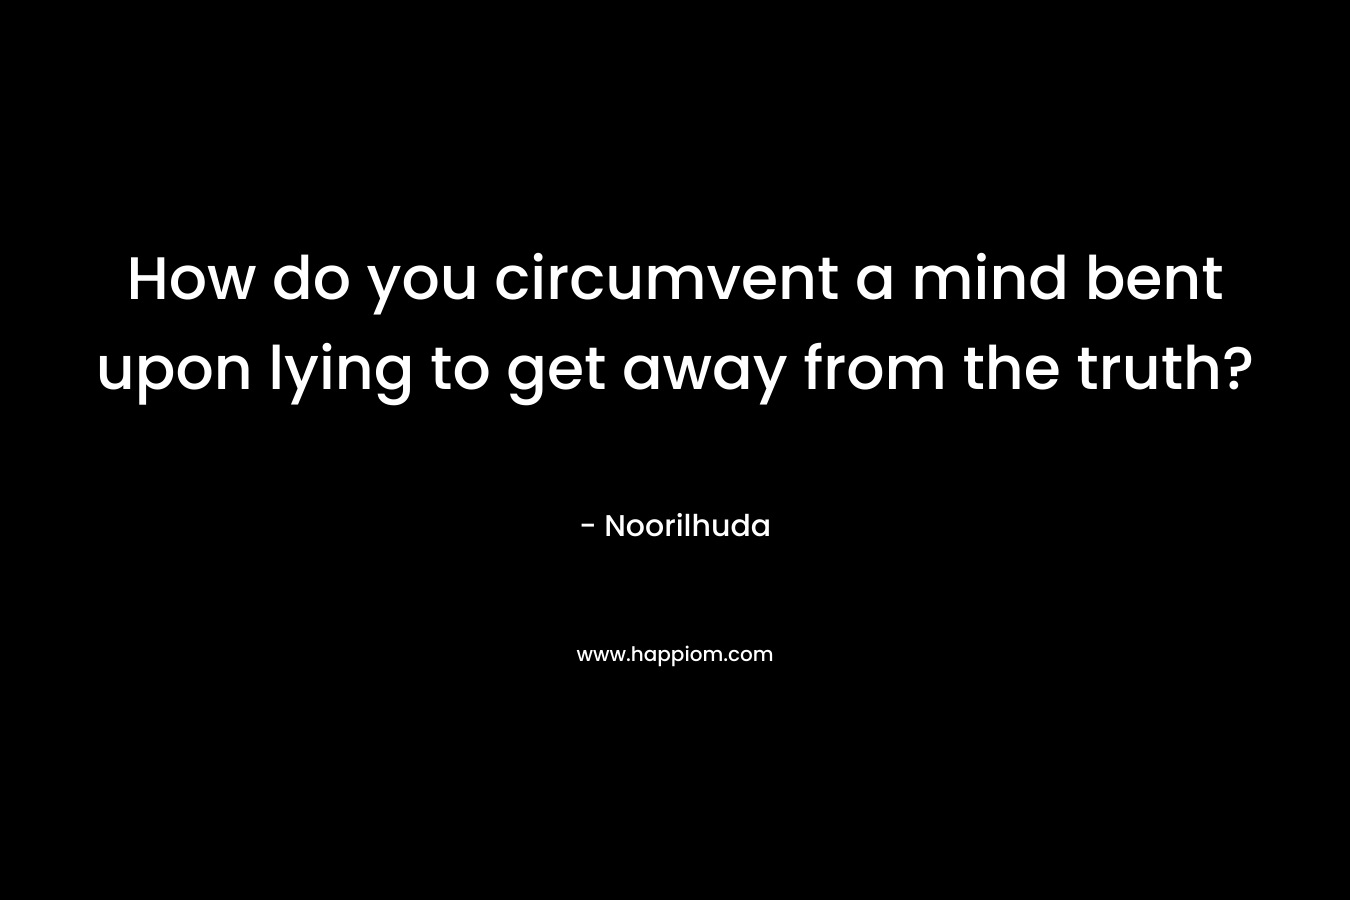 How do you circumvent a mind bent upon lying to get away from the truth? – Noorilhuda